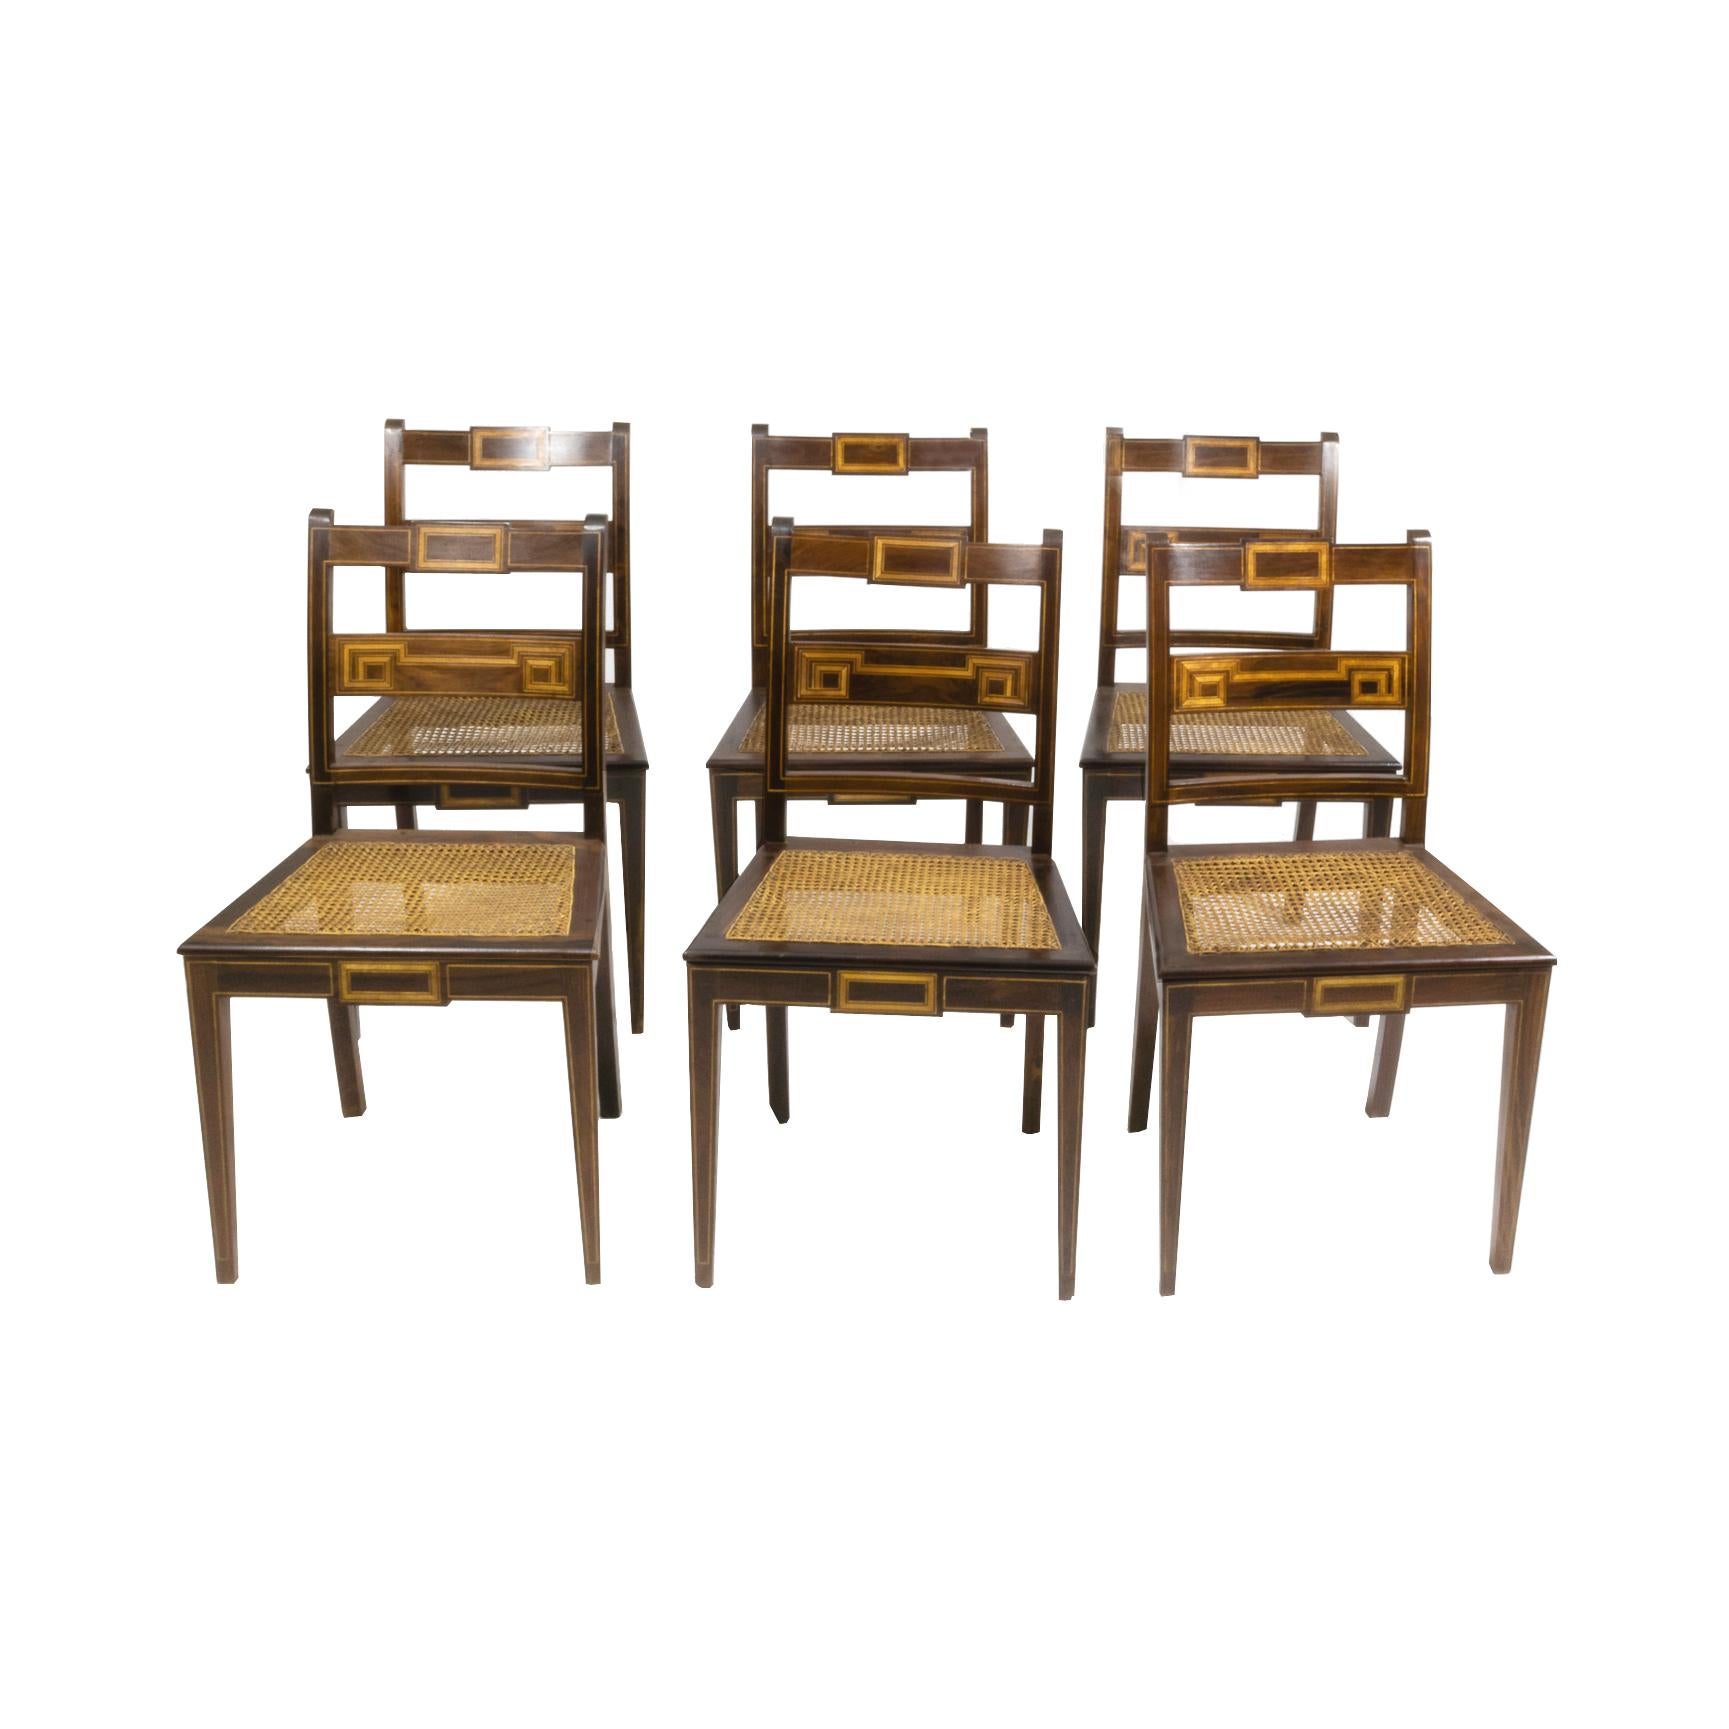 Set of Six Portuguese Chairs, 20th Century For Sale 4